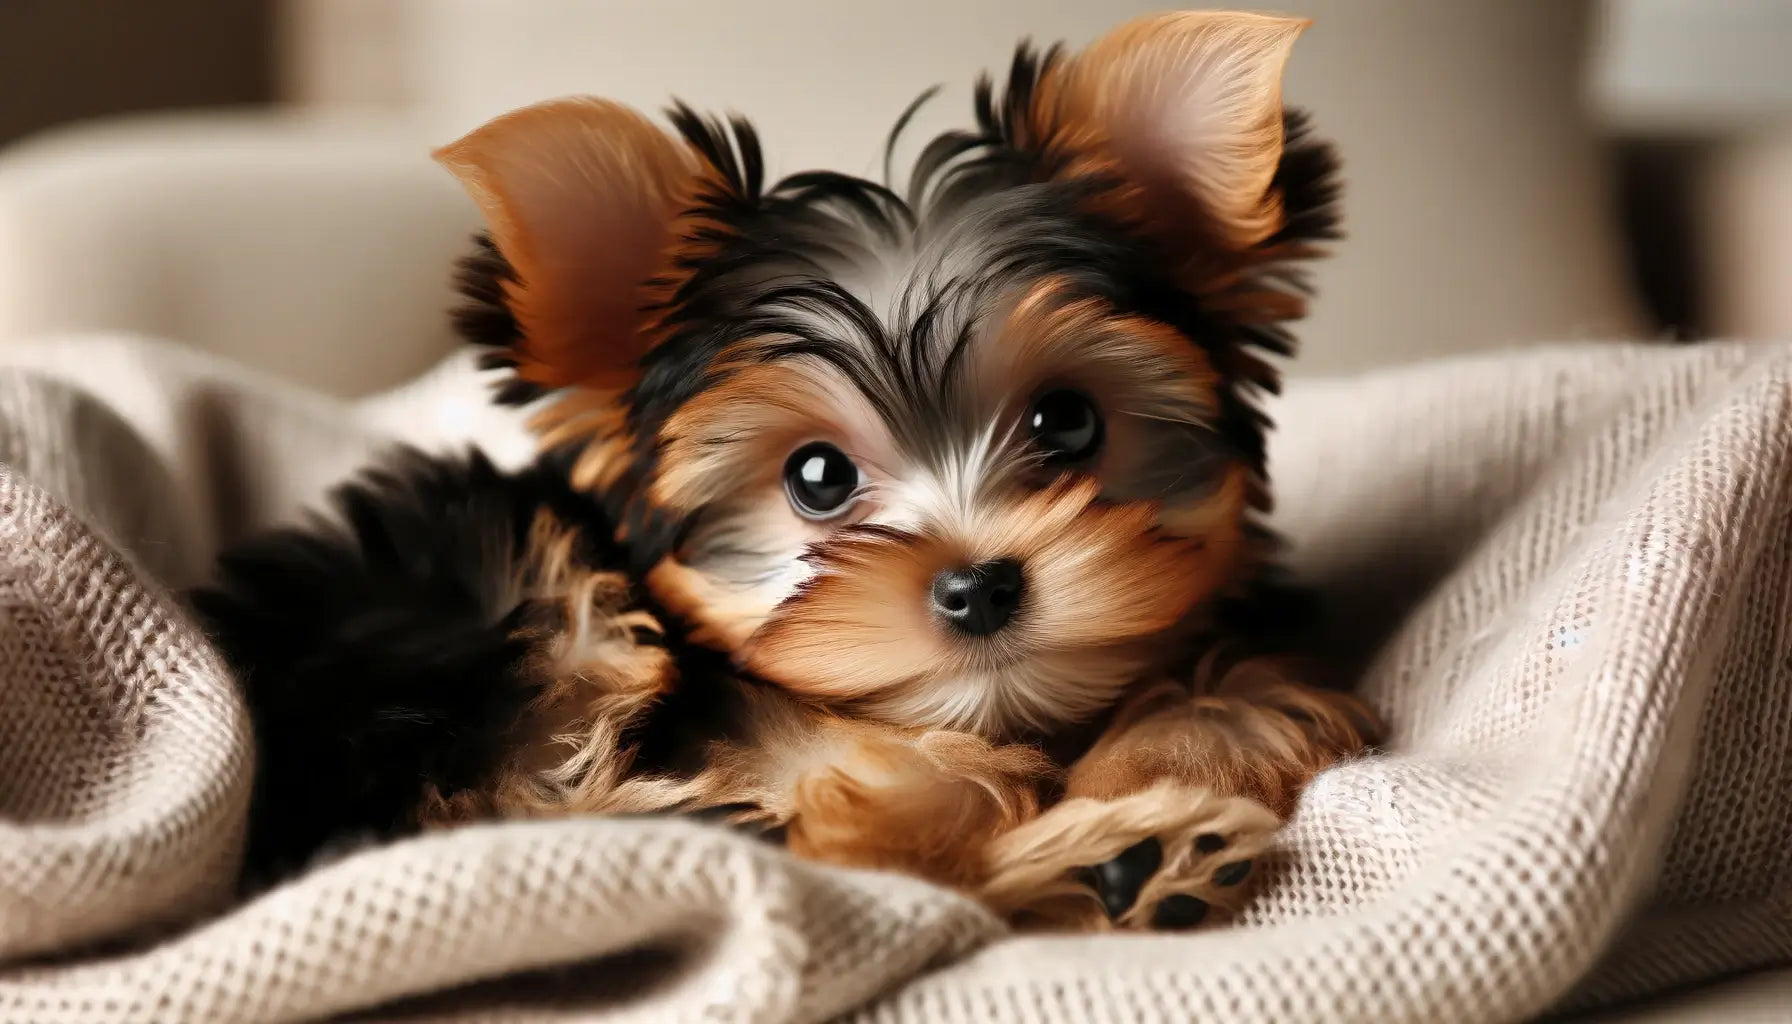 A Teacup Yorkie lies cozily, its expressive eyes and small physique illustrating the breed's need for a nurturing and protective environment.